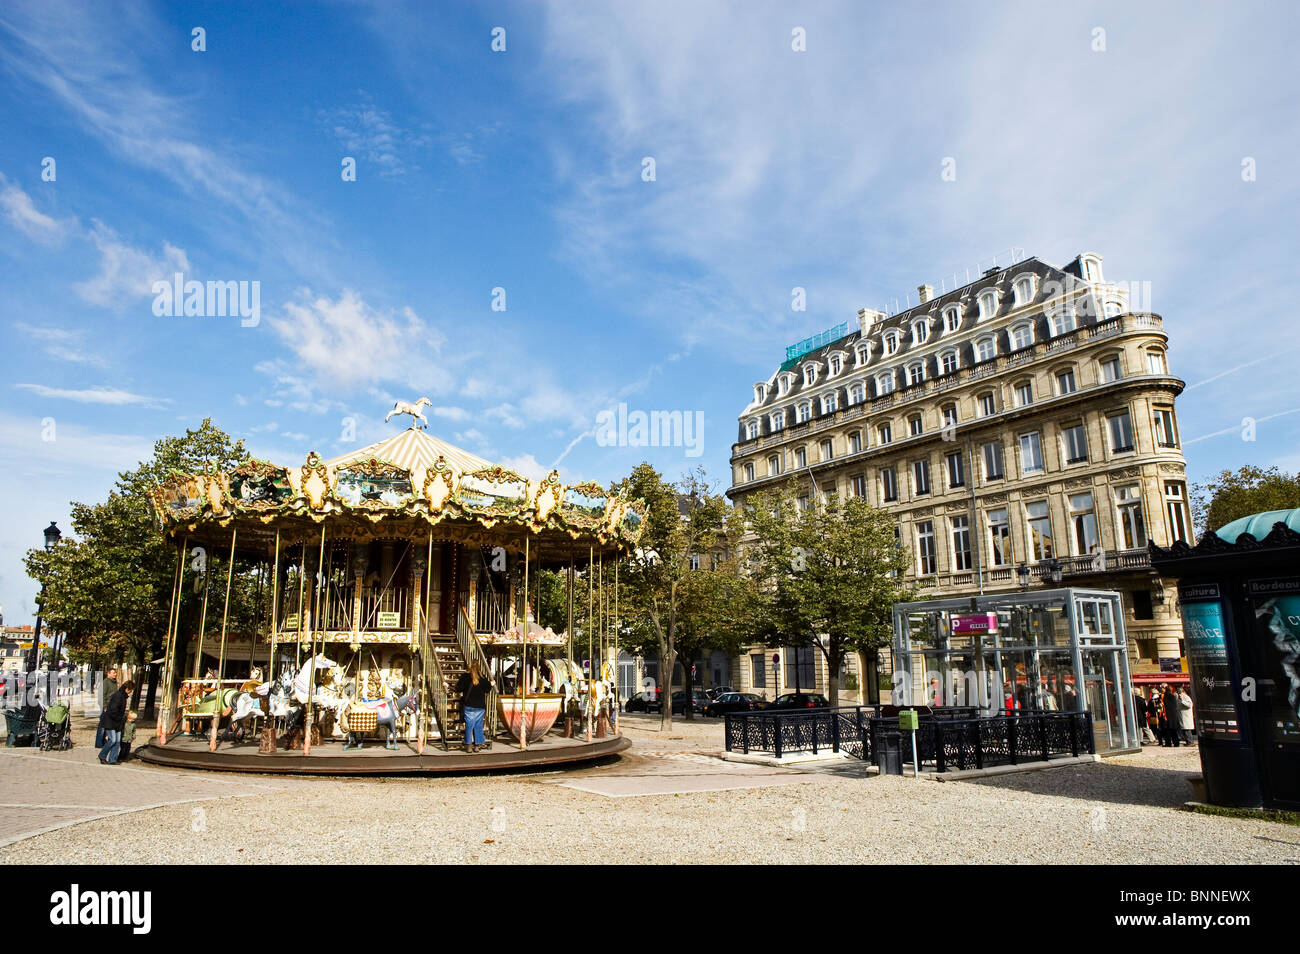 A carousel in Bordeaux city centre, France Stock Photo